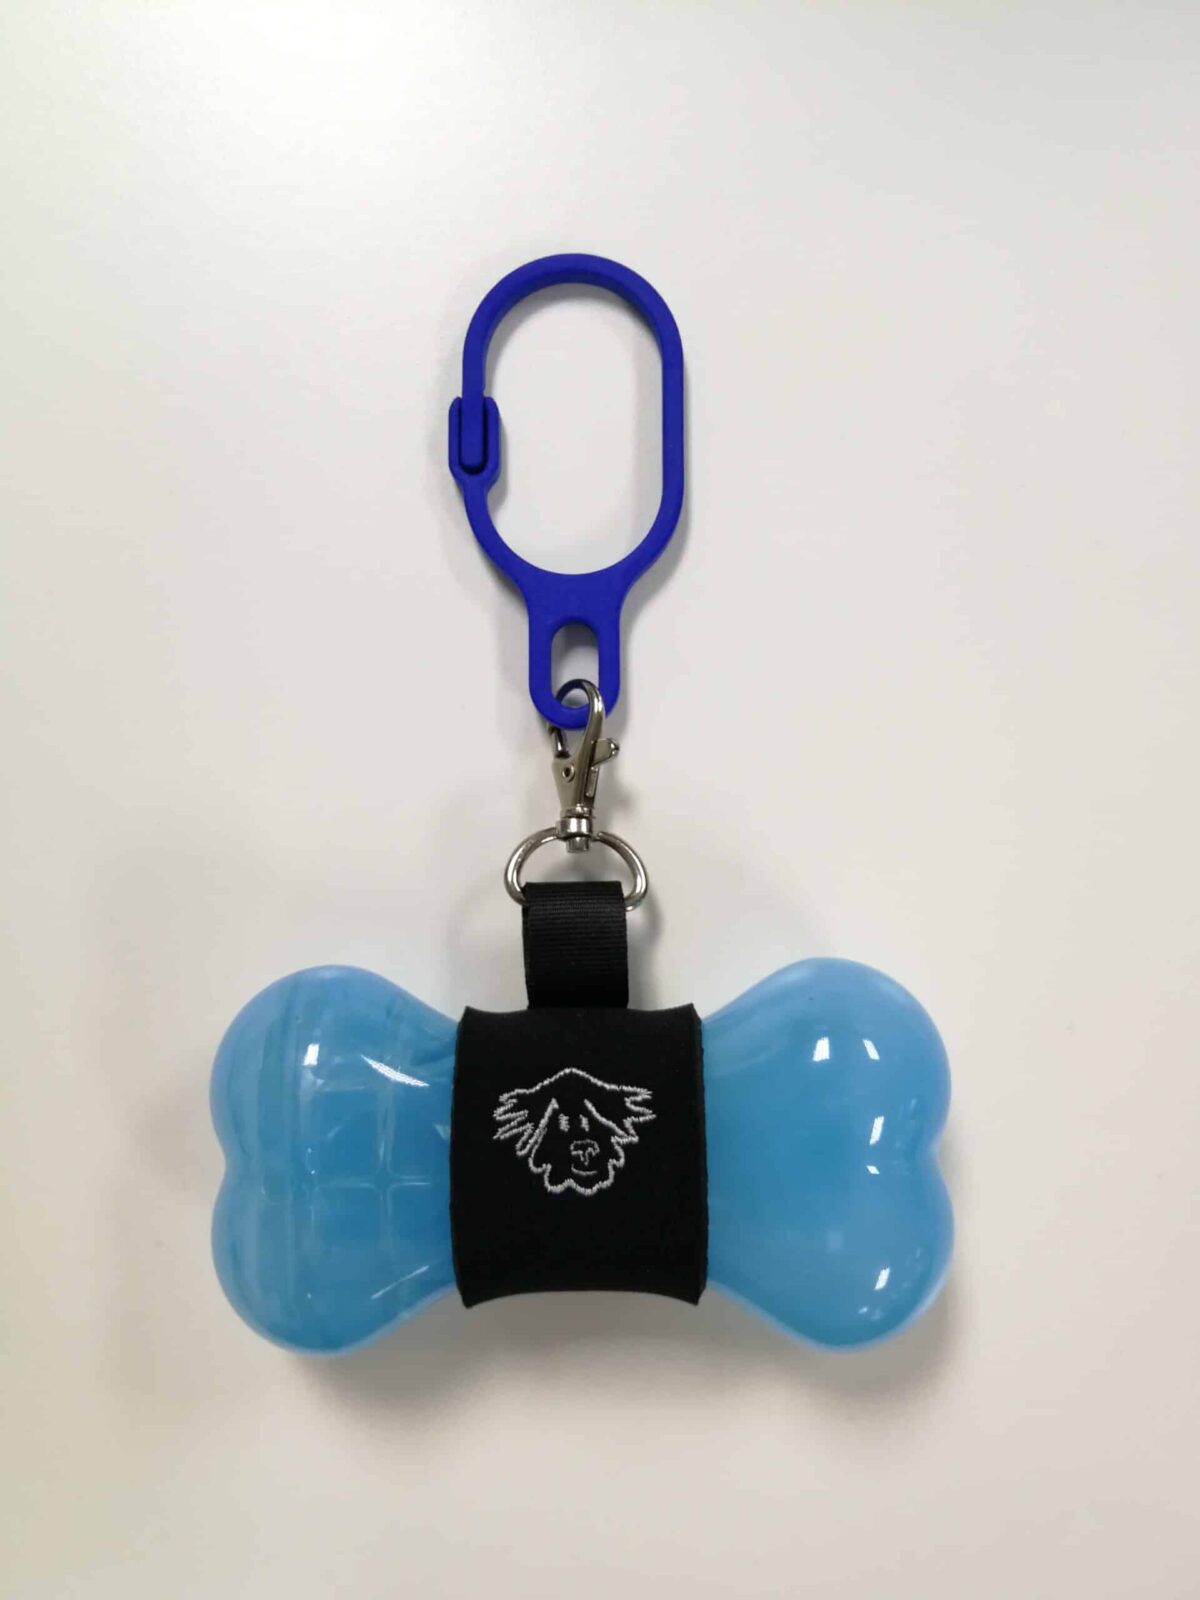 Further Prototyping for a blue dog accessory